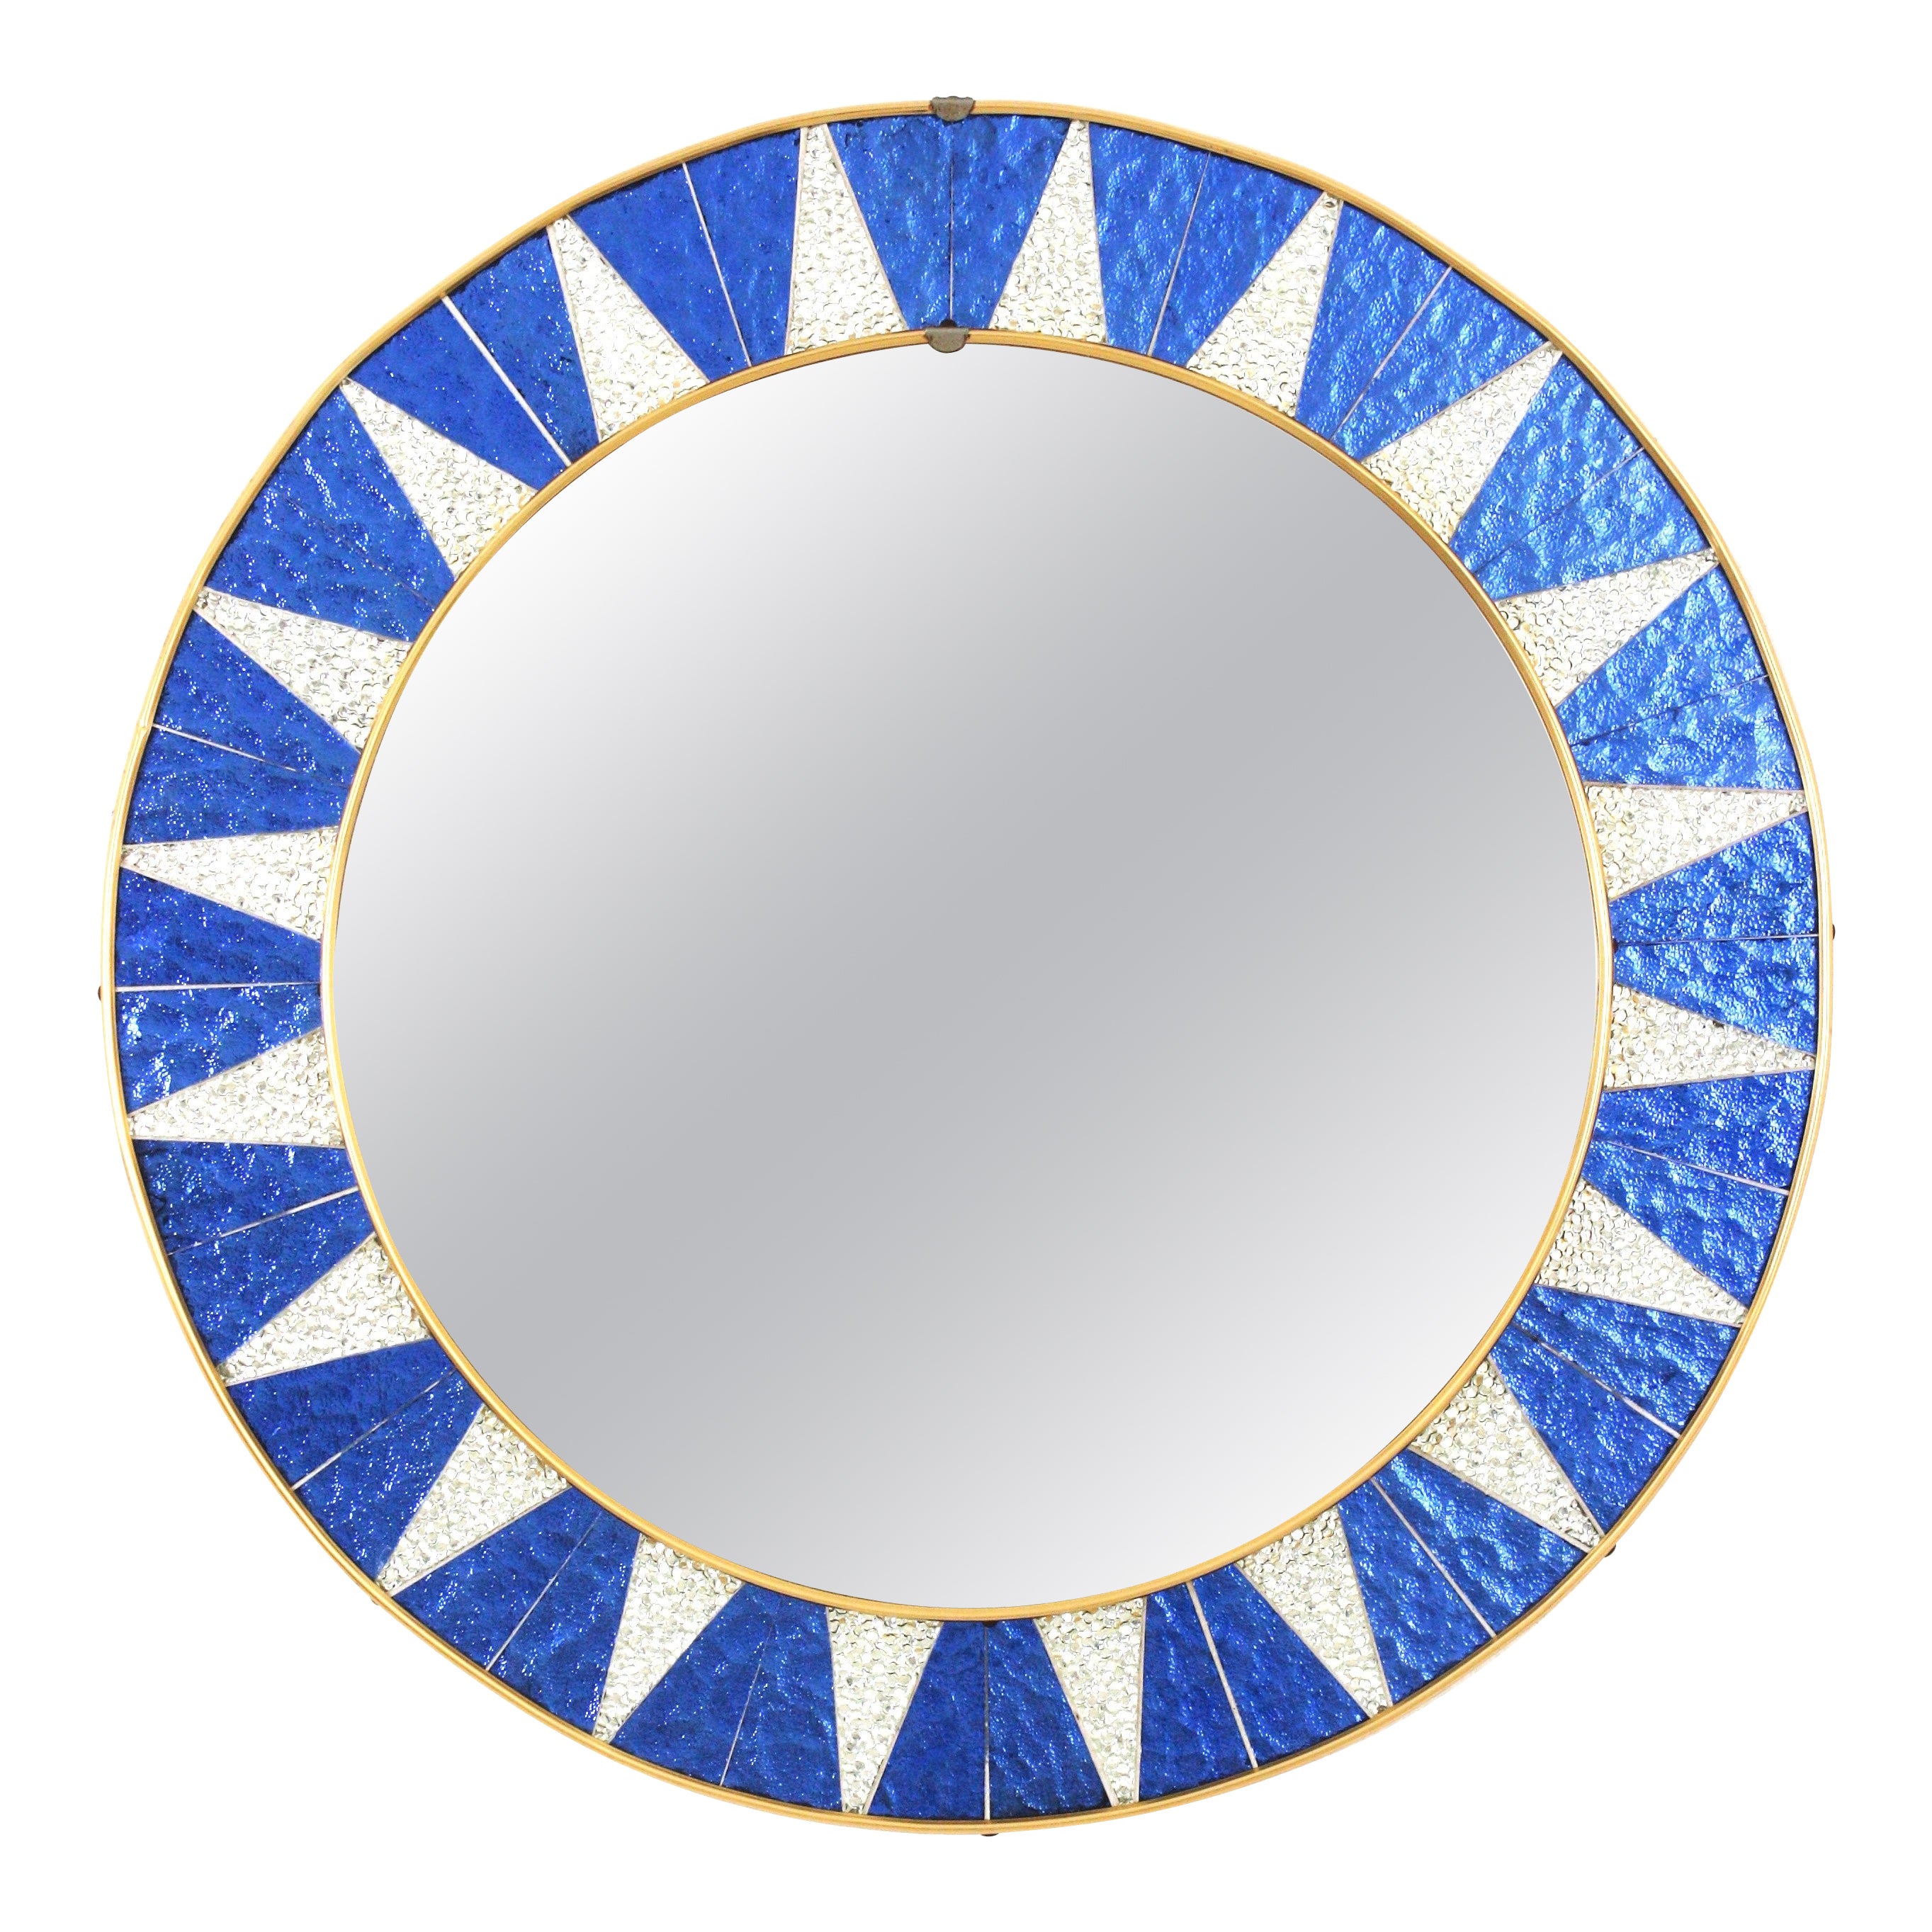 Sunburst Mirror with Blue and Silvered Mosaic Glass Frame, Spain, 1960s